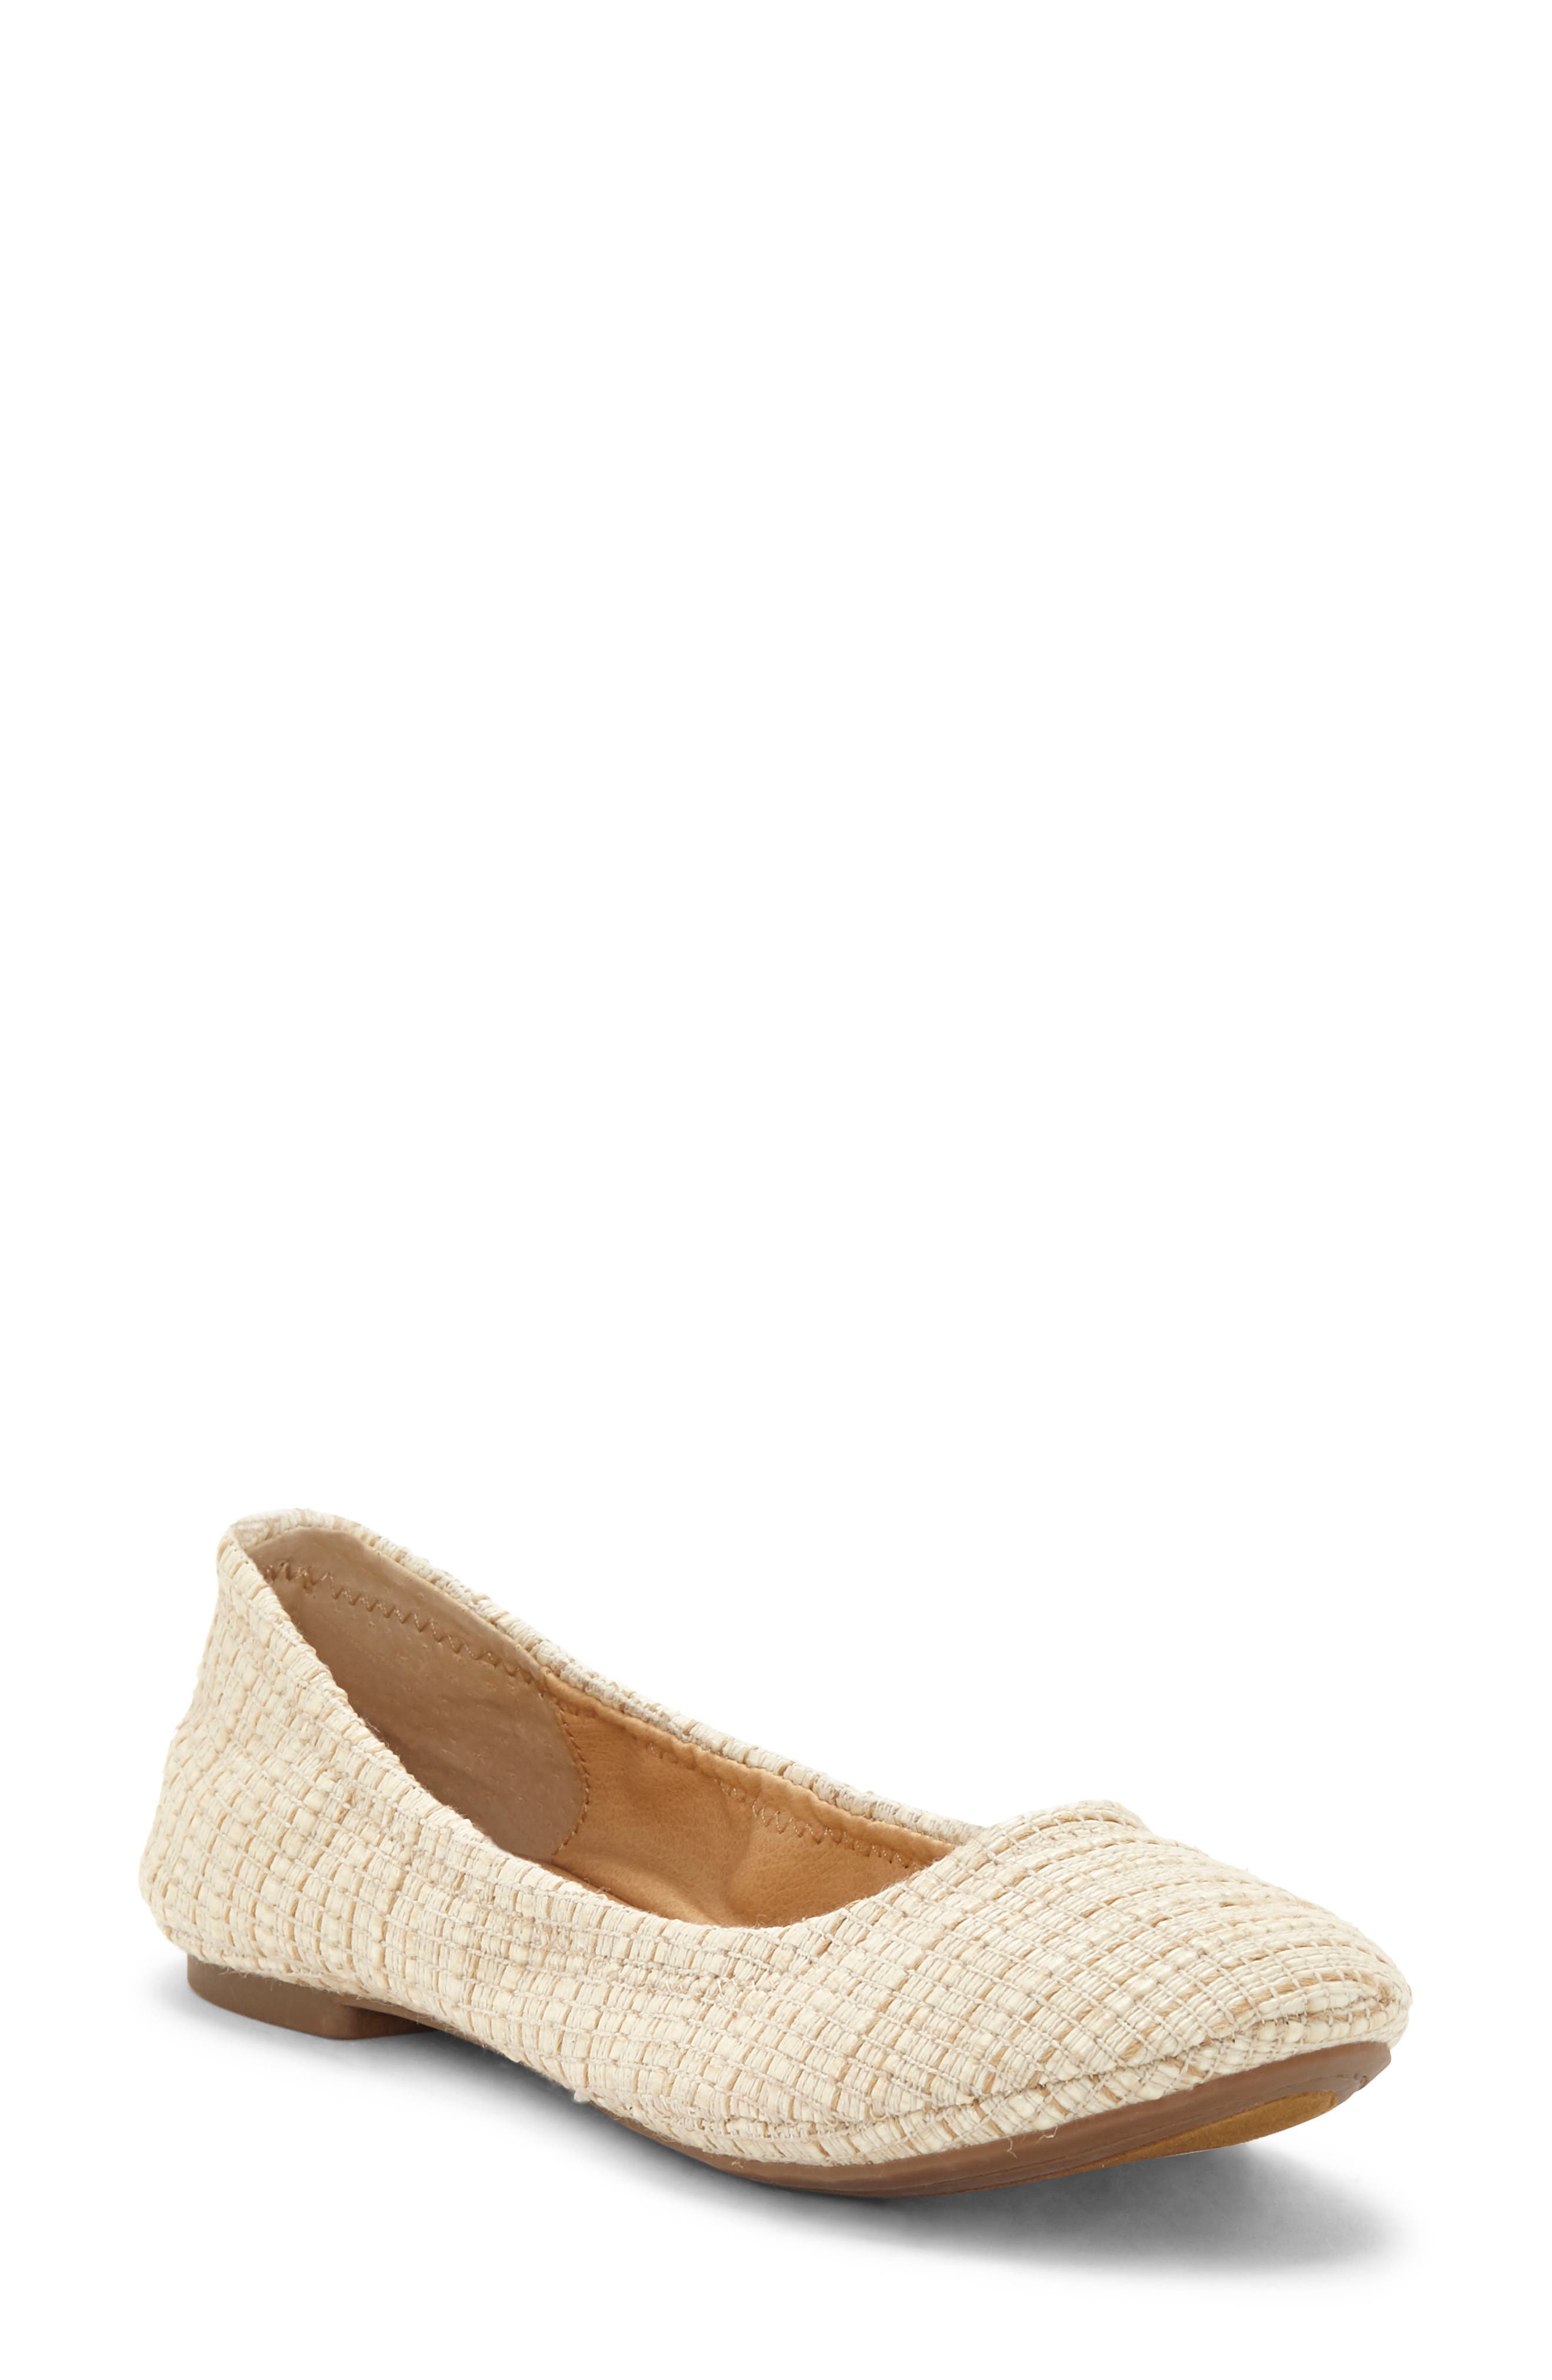 lucky brand emmie flats canada